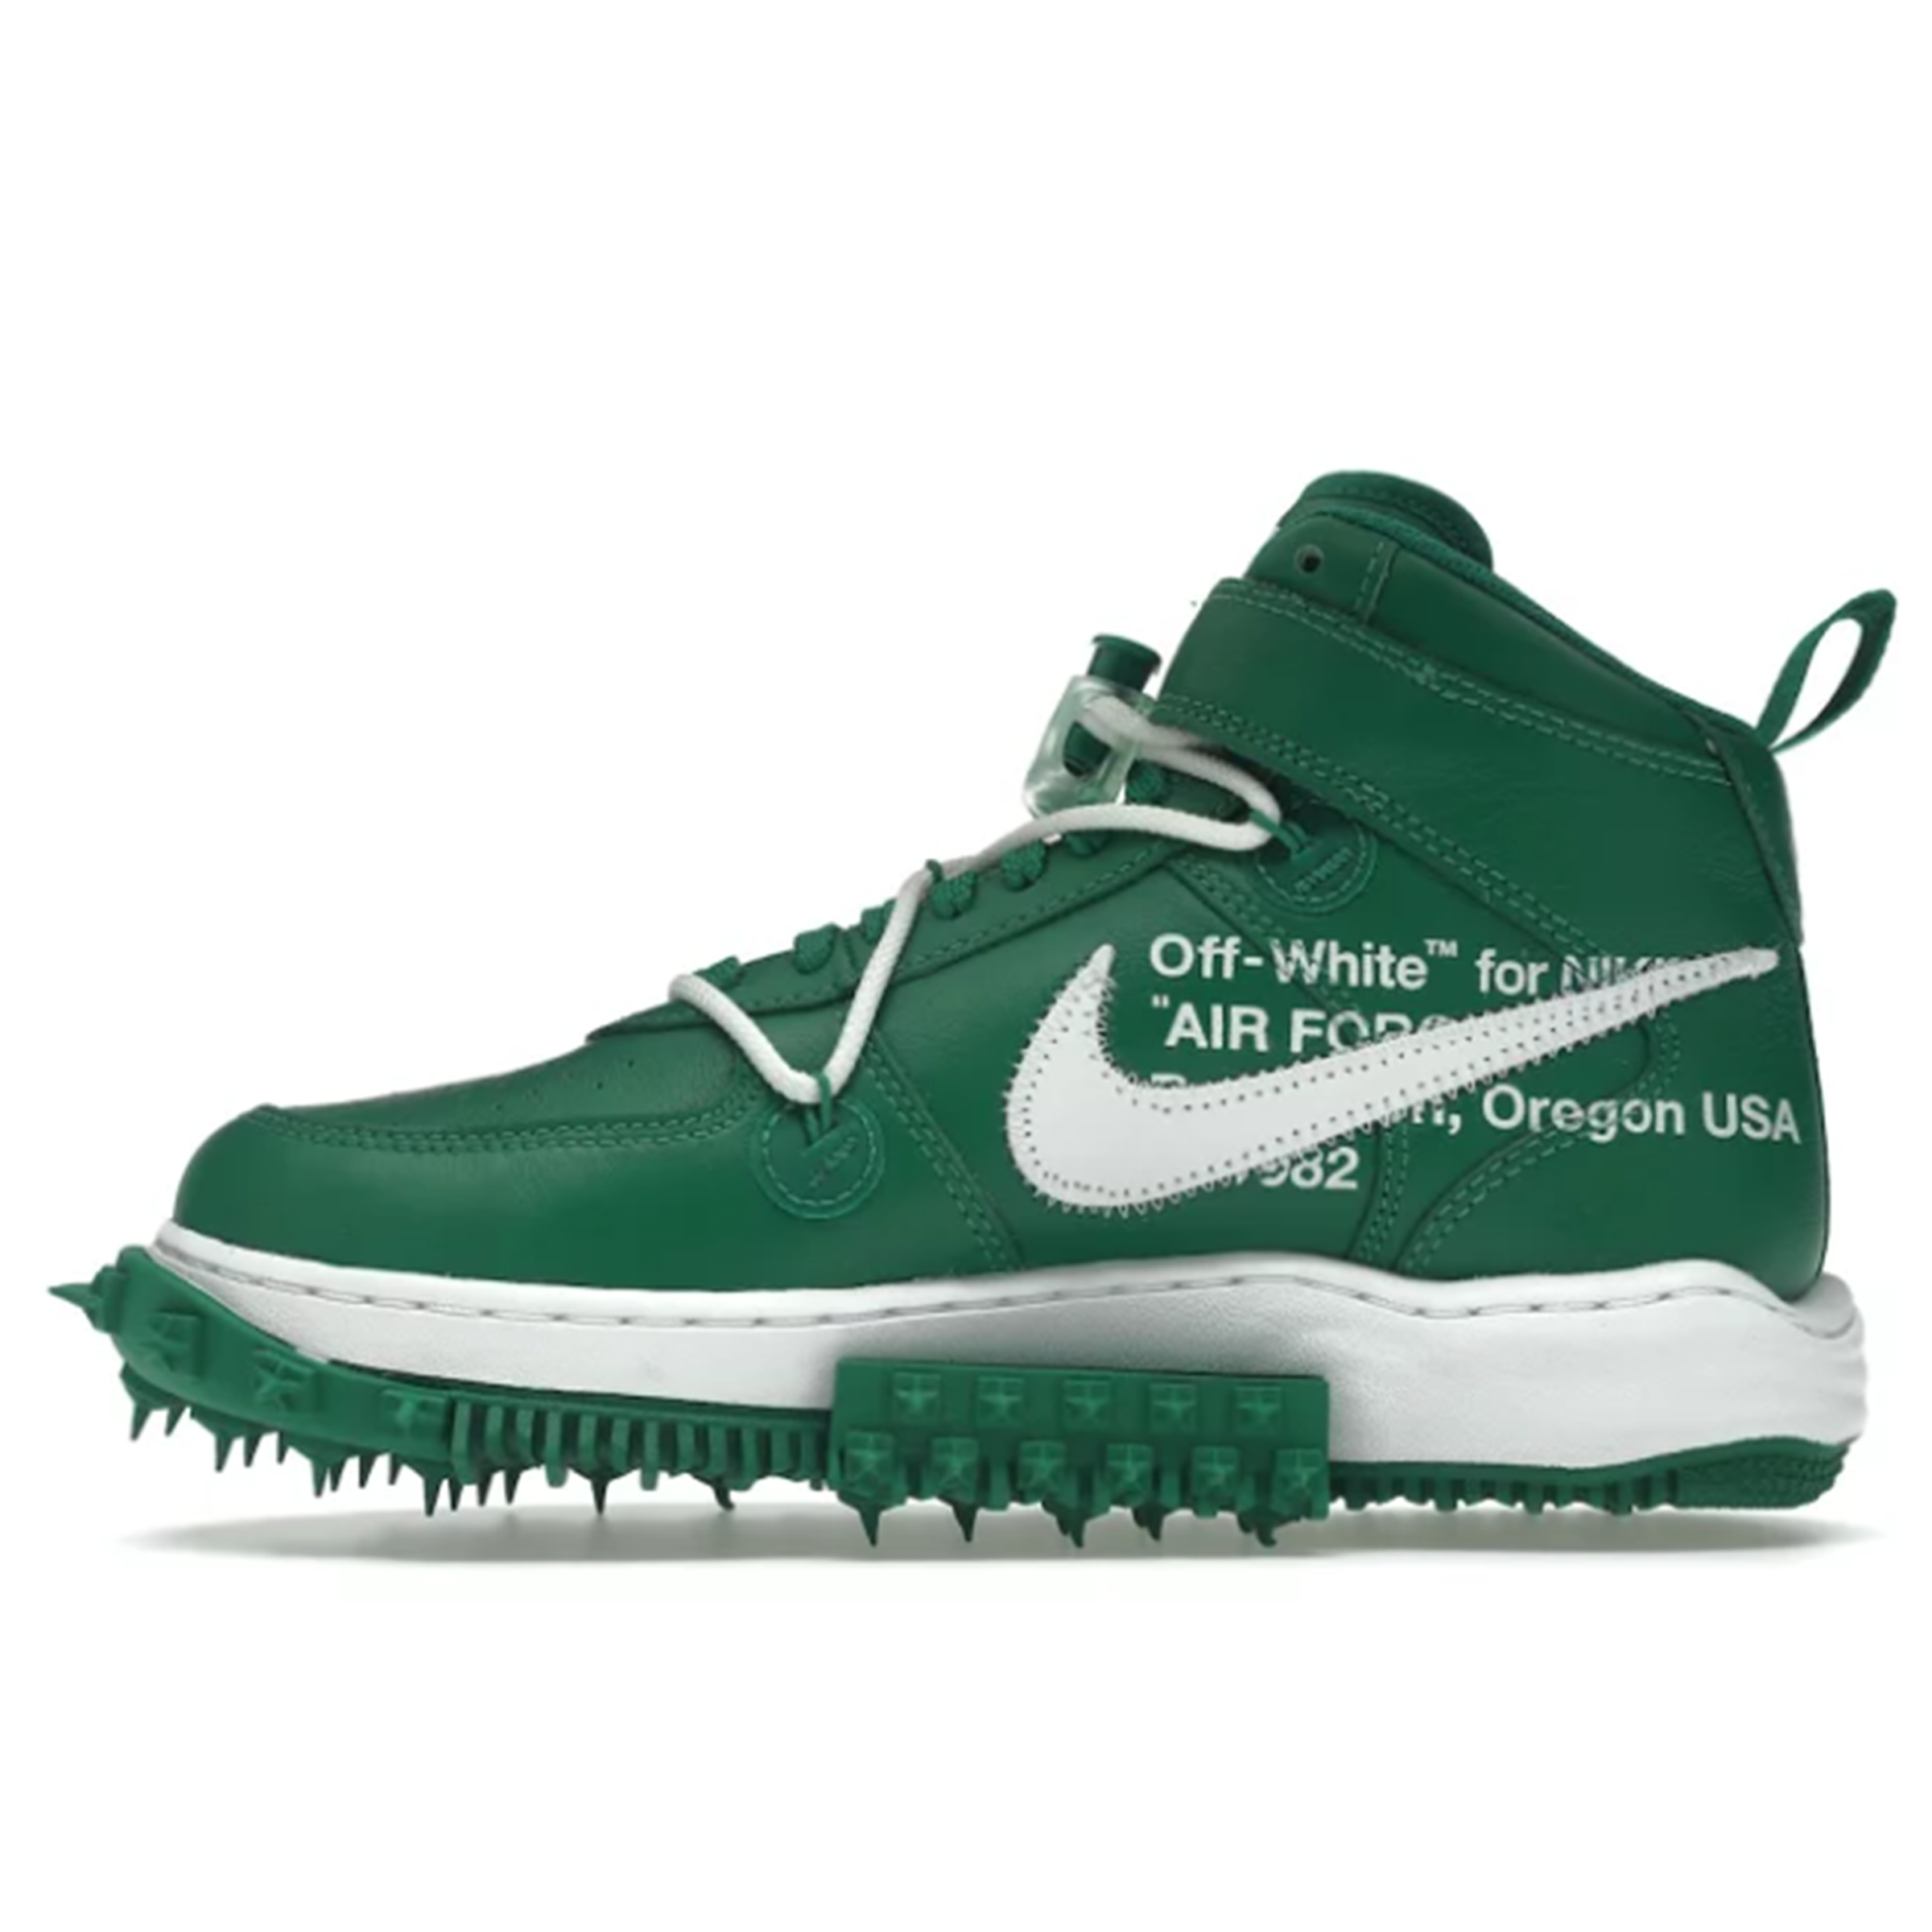 Off-White x Nike - Air Force 1 Mid "Pine Green"